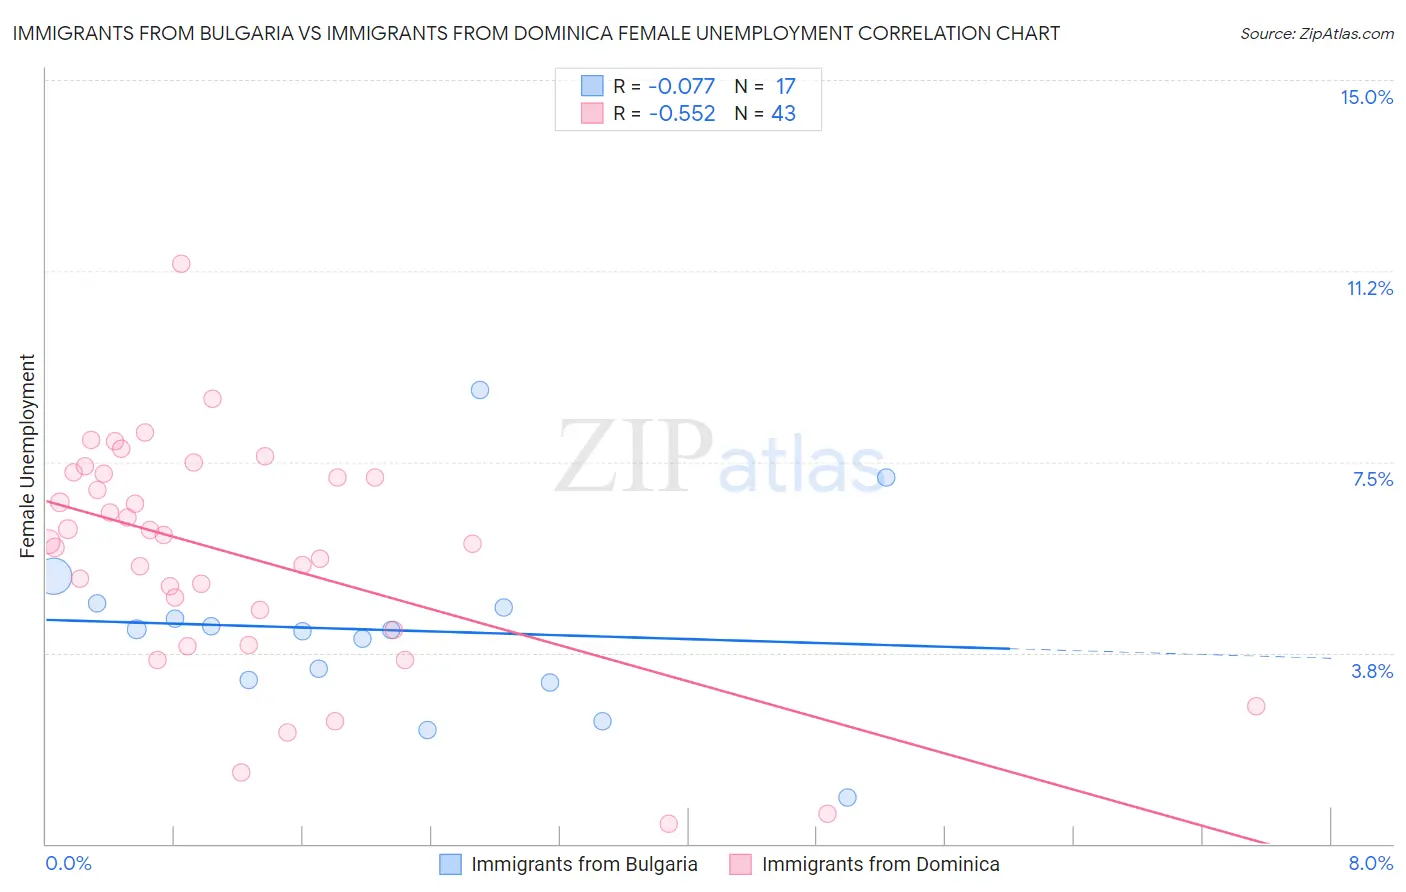 Immigrants from Bulgaria vs Immigrants from Dominica Female Unemployment